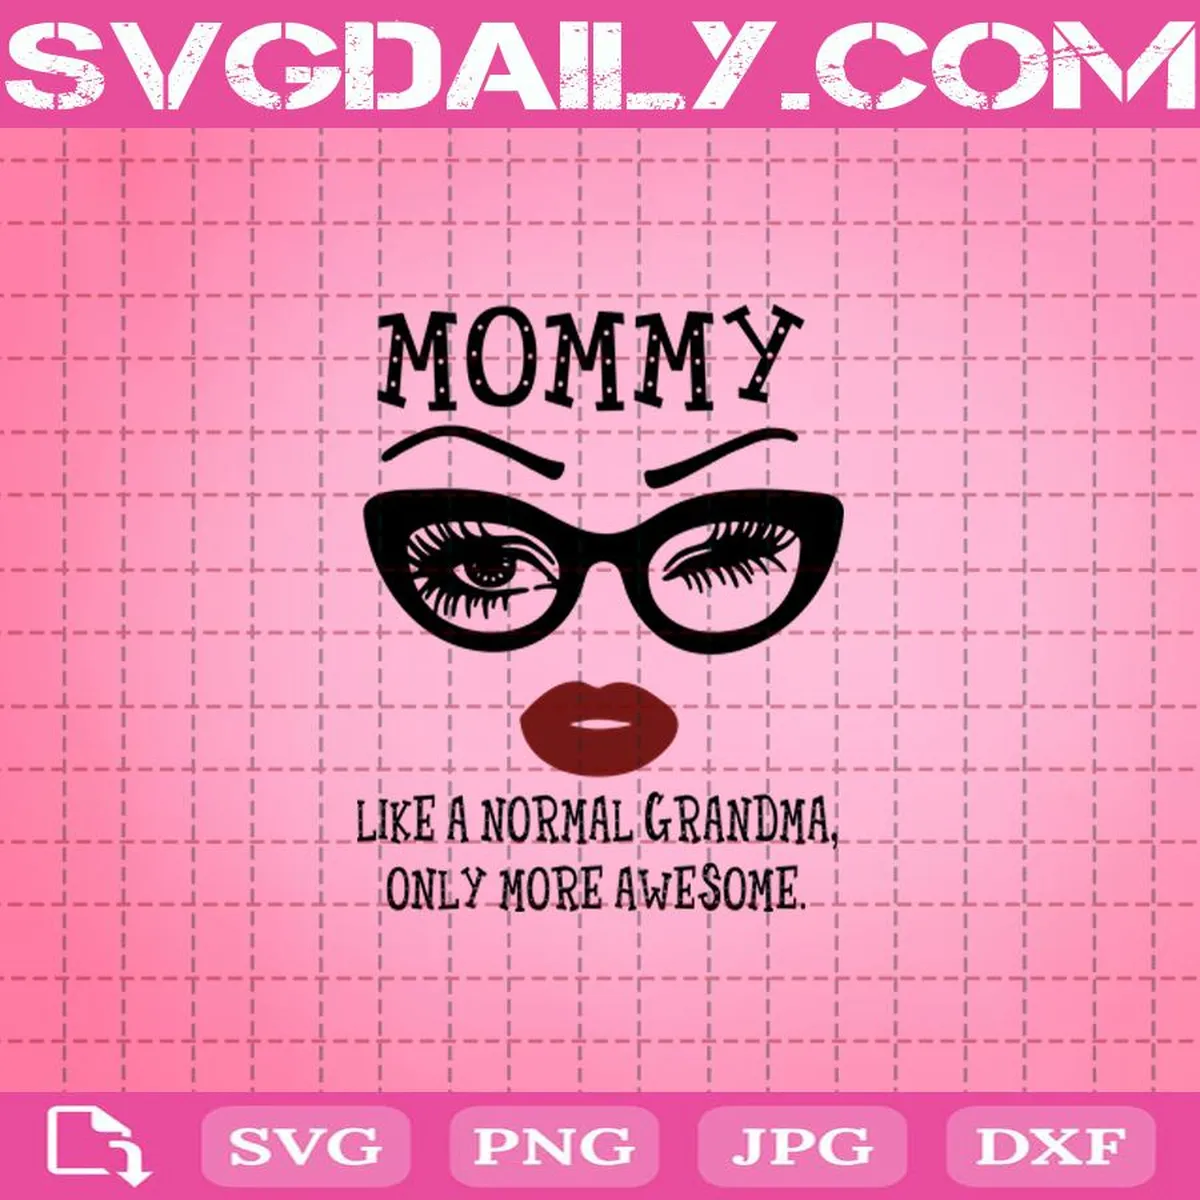 Mommy Like A Normal Grandma, Only More Awesome Svg, Mommy Svg, Awesome Glasses Face Svg, Awesome Eyes Lip Svg